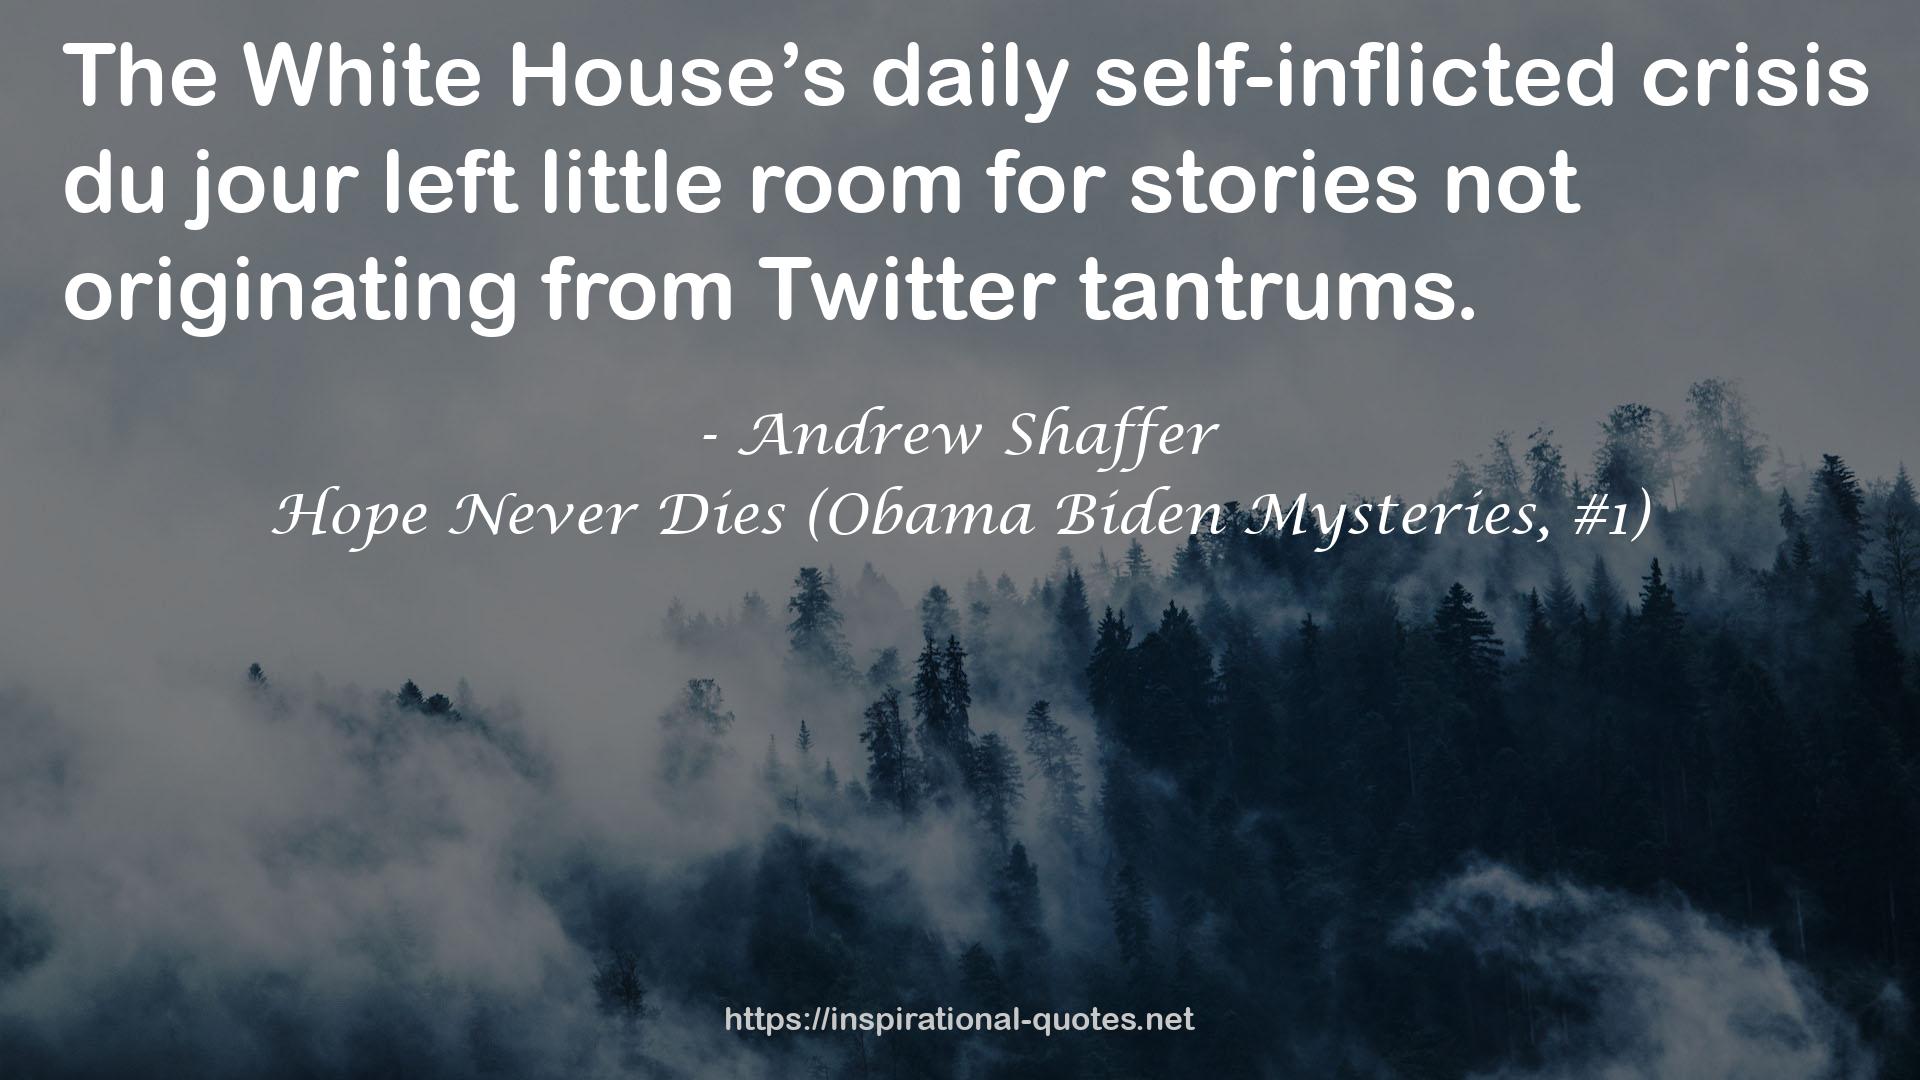 Andrew Shaffer QUOTES